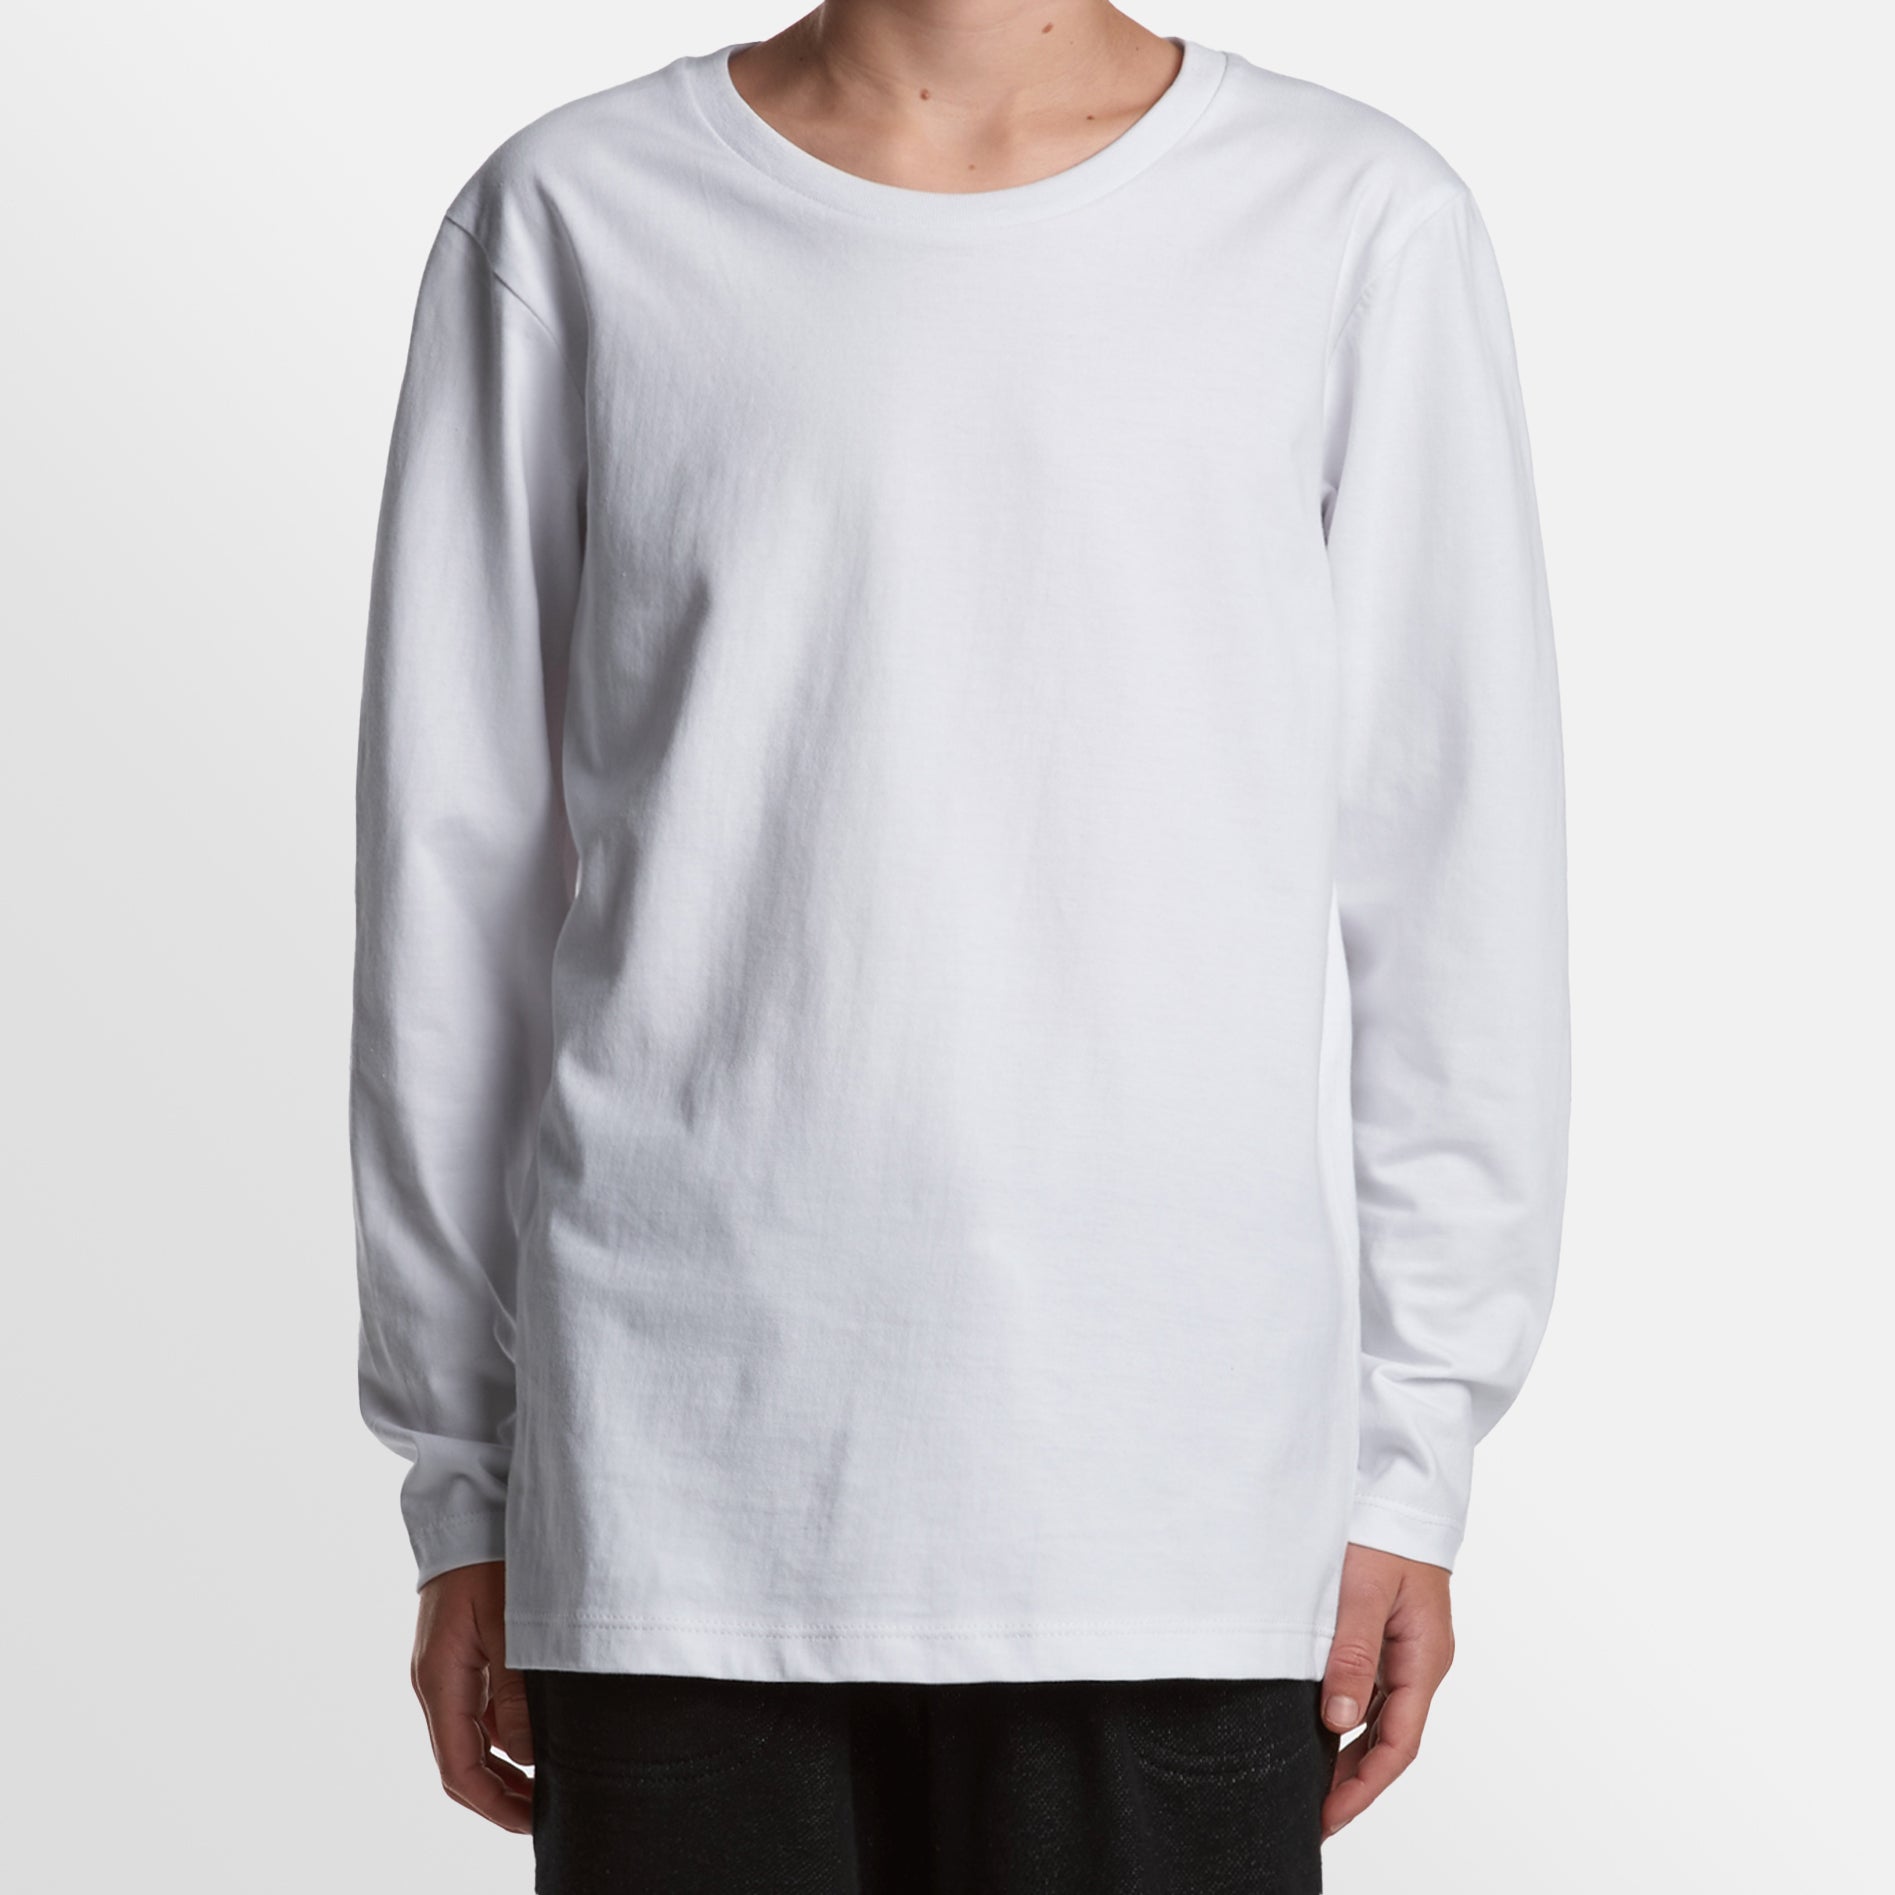 Premium Youth Long Sleeve Tee - On Request